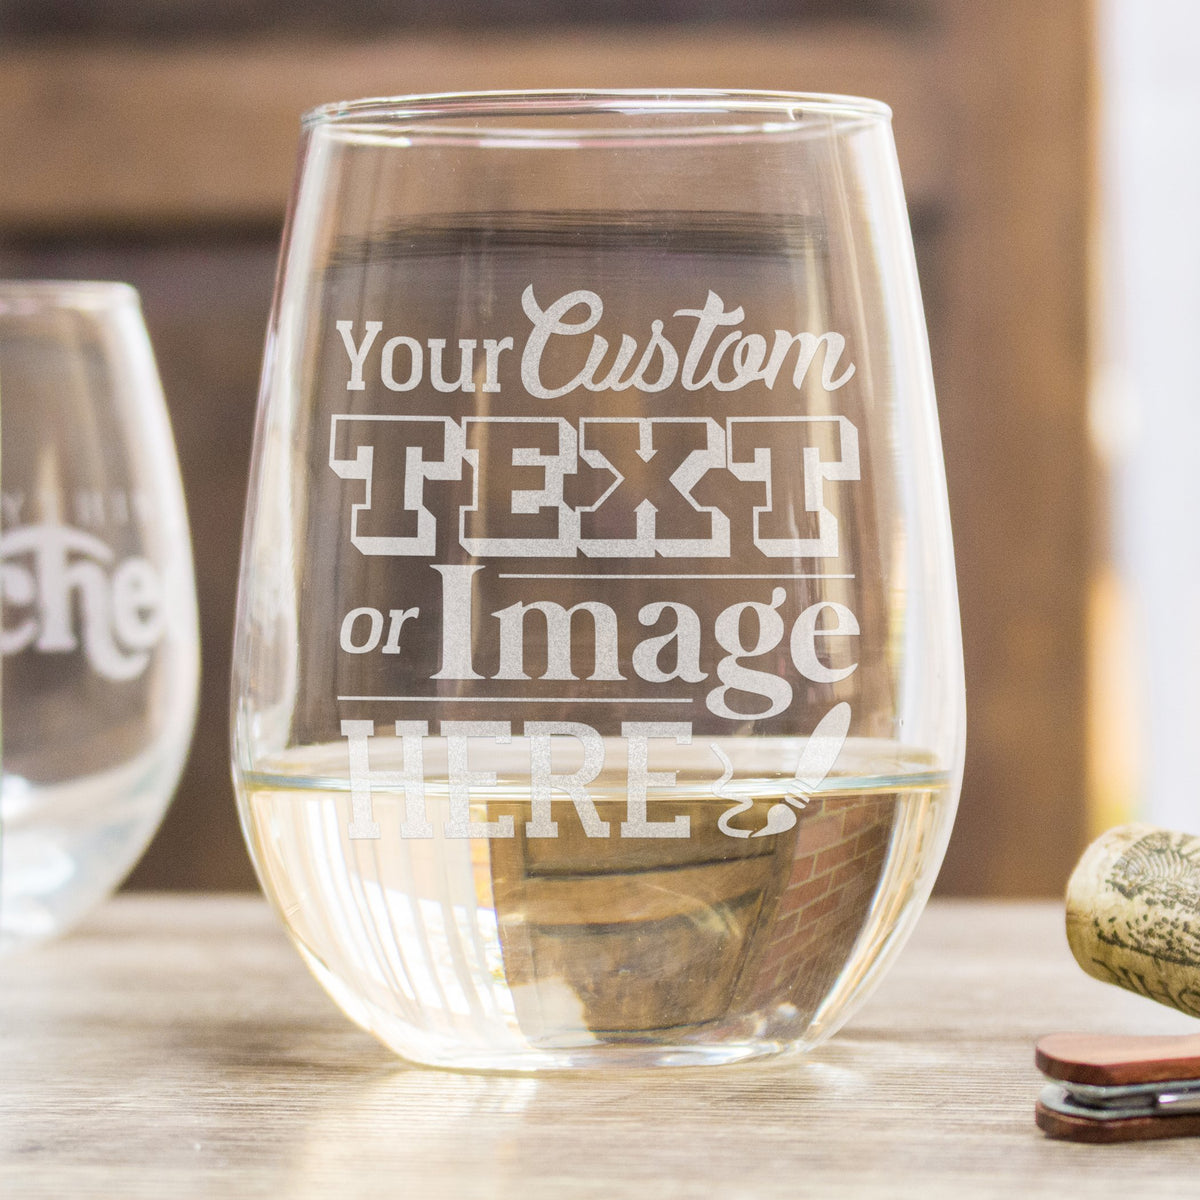 Peacock White Stemless Wine Glass Set, Engraved Glass